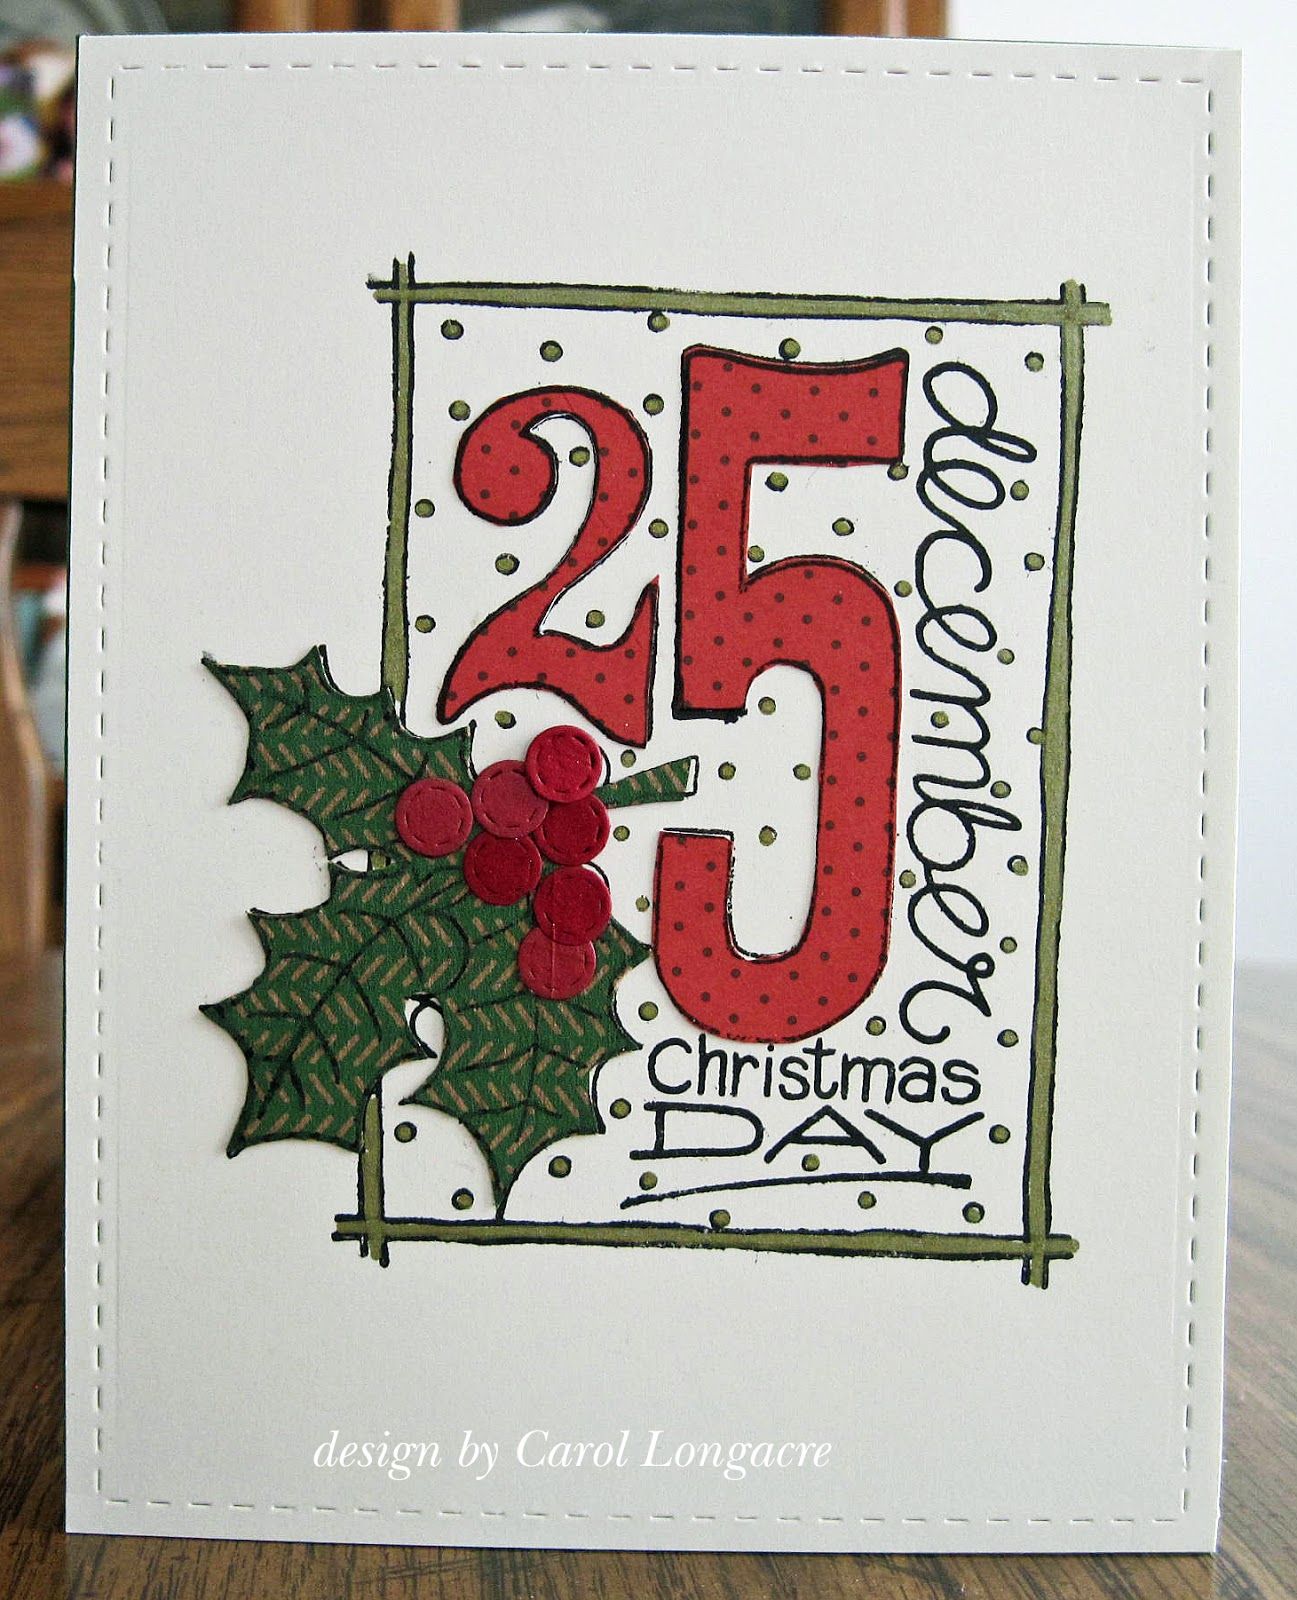 Today I have a card which was paper-pieced with snippets of retired ...